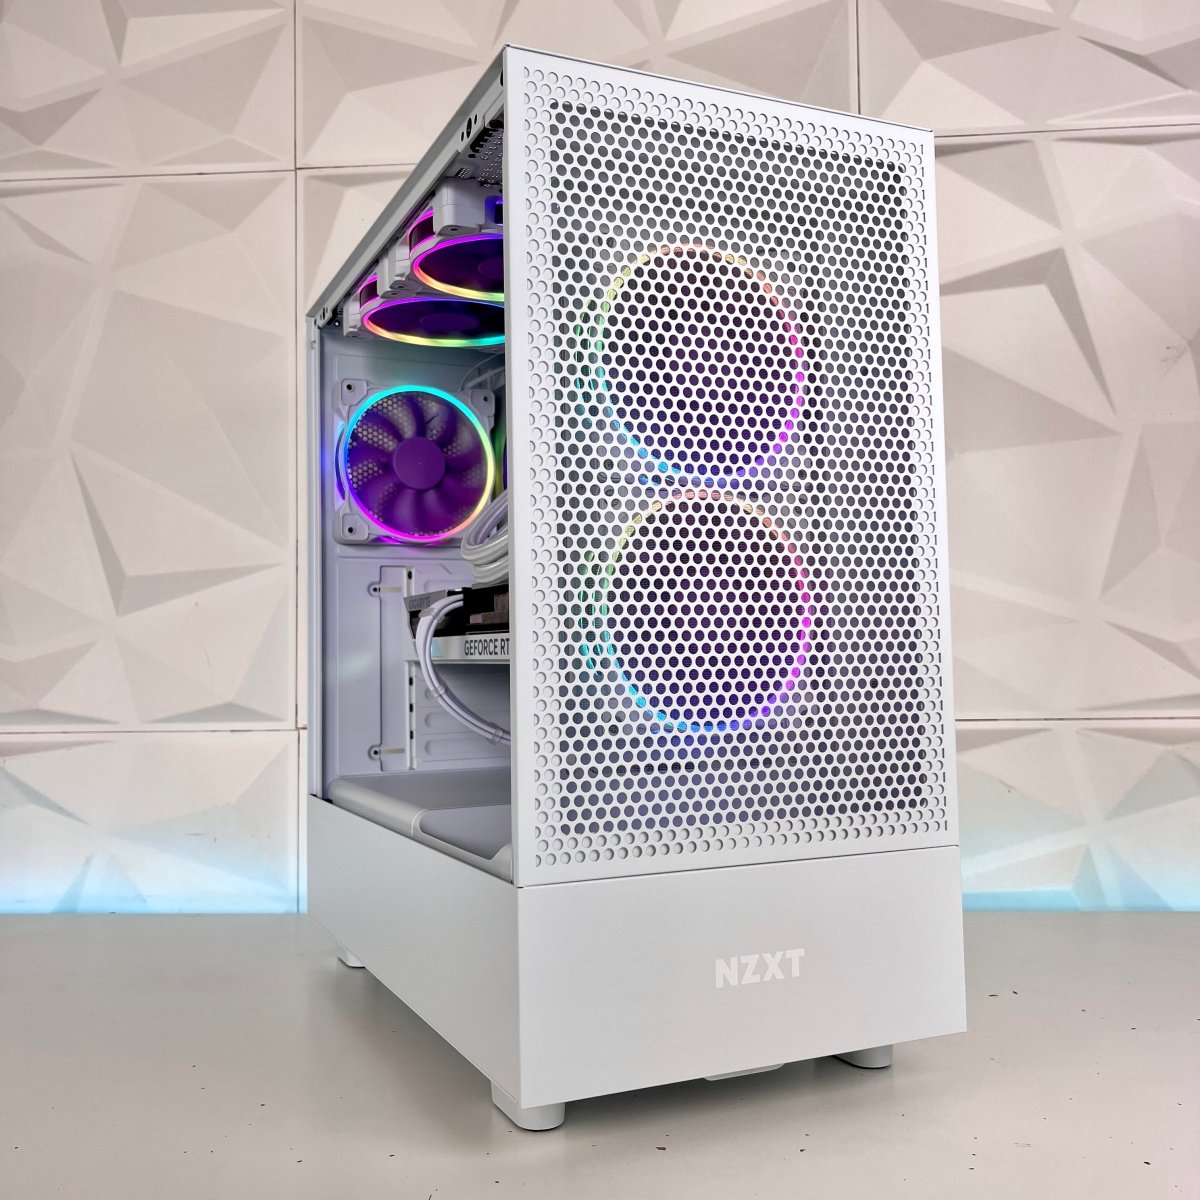 IGaming Ryzen 5/7 7700X | RTX 4060/4070 Ti | 32GB DDR5 | H5 Purflow - I Gaming Computer | Australia Wide Shipping | Buy now, Pay Later with Afterpay, Klarna, Zip, Latitude & Paypal